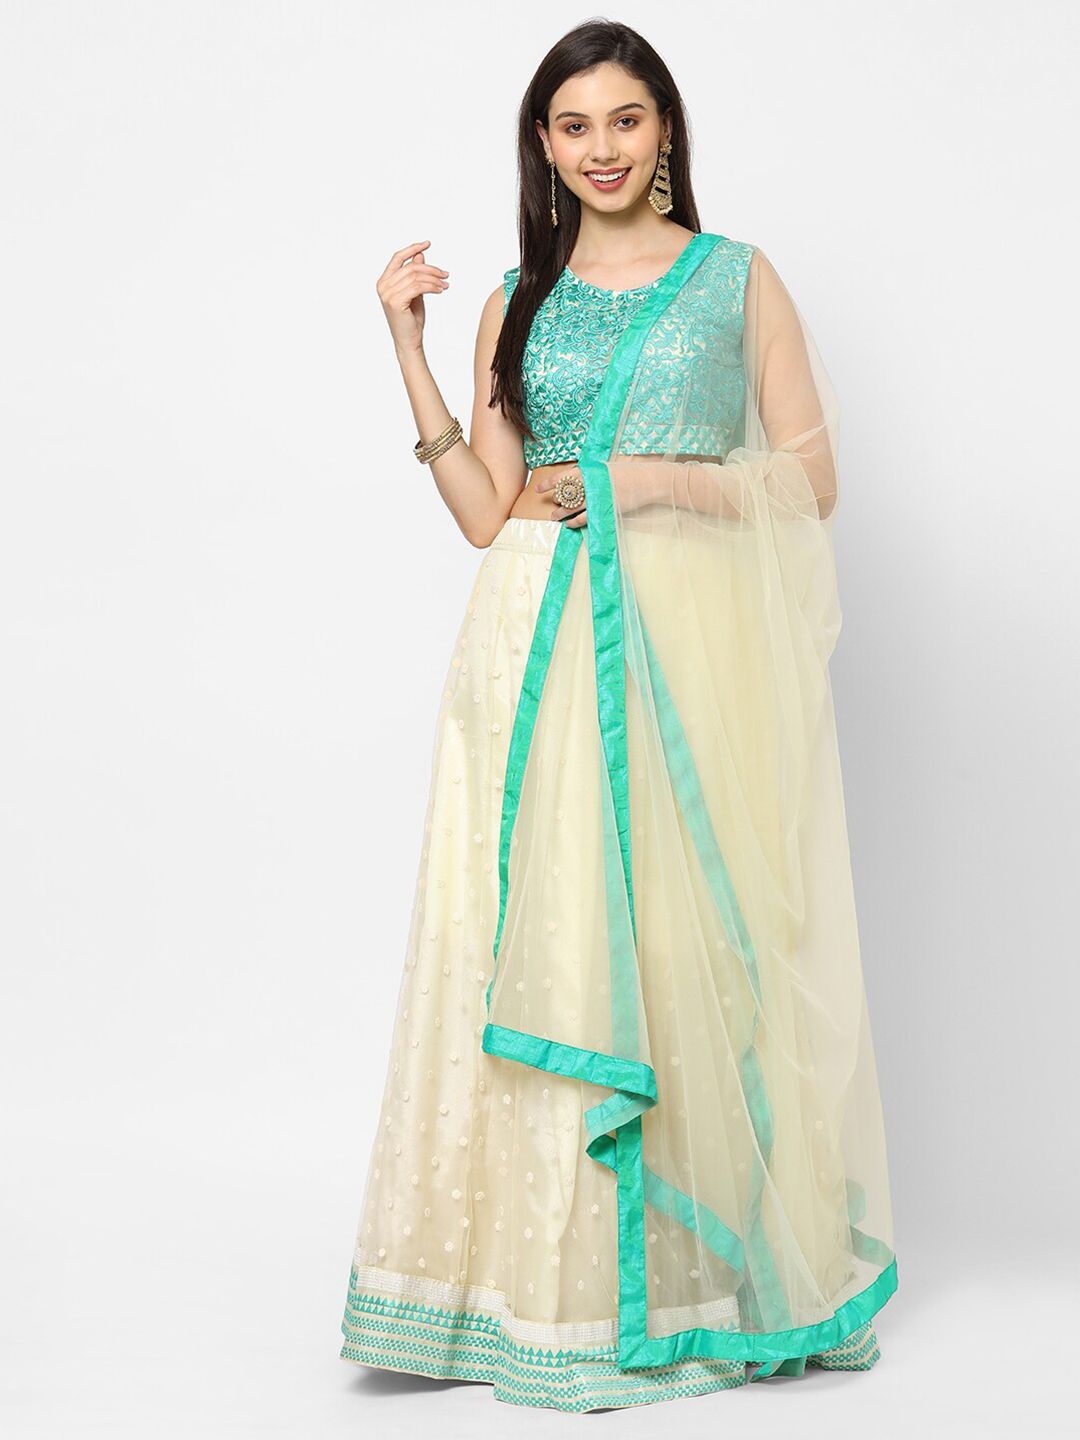 RedRound Cream-Coloured & Turquoise Blue Embroidered Thread Work Semi-Stitched Lehenga & Unstitched Blouse Price in India